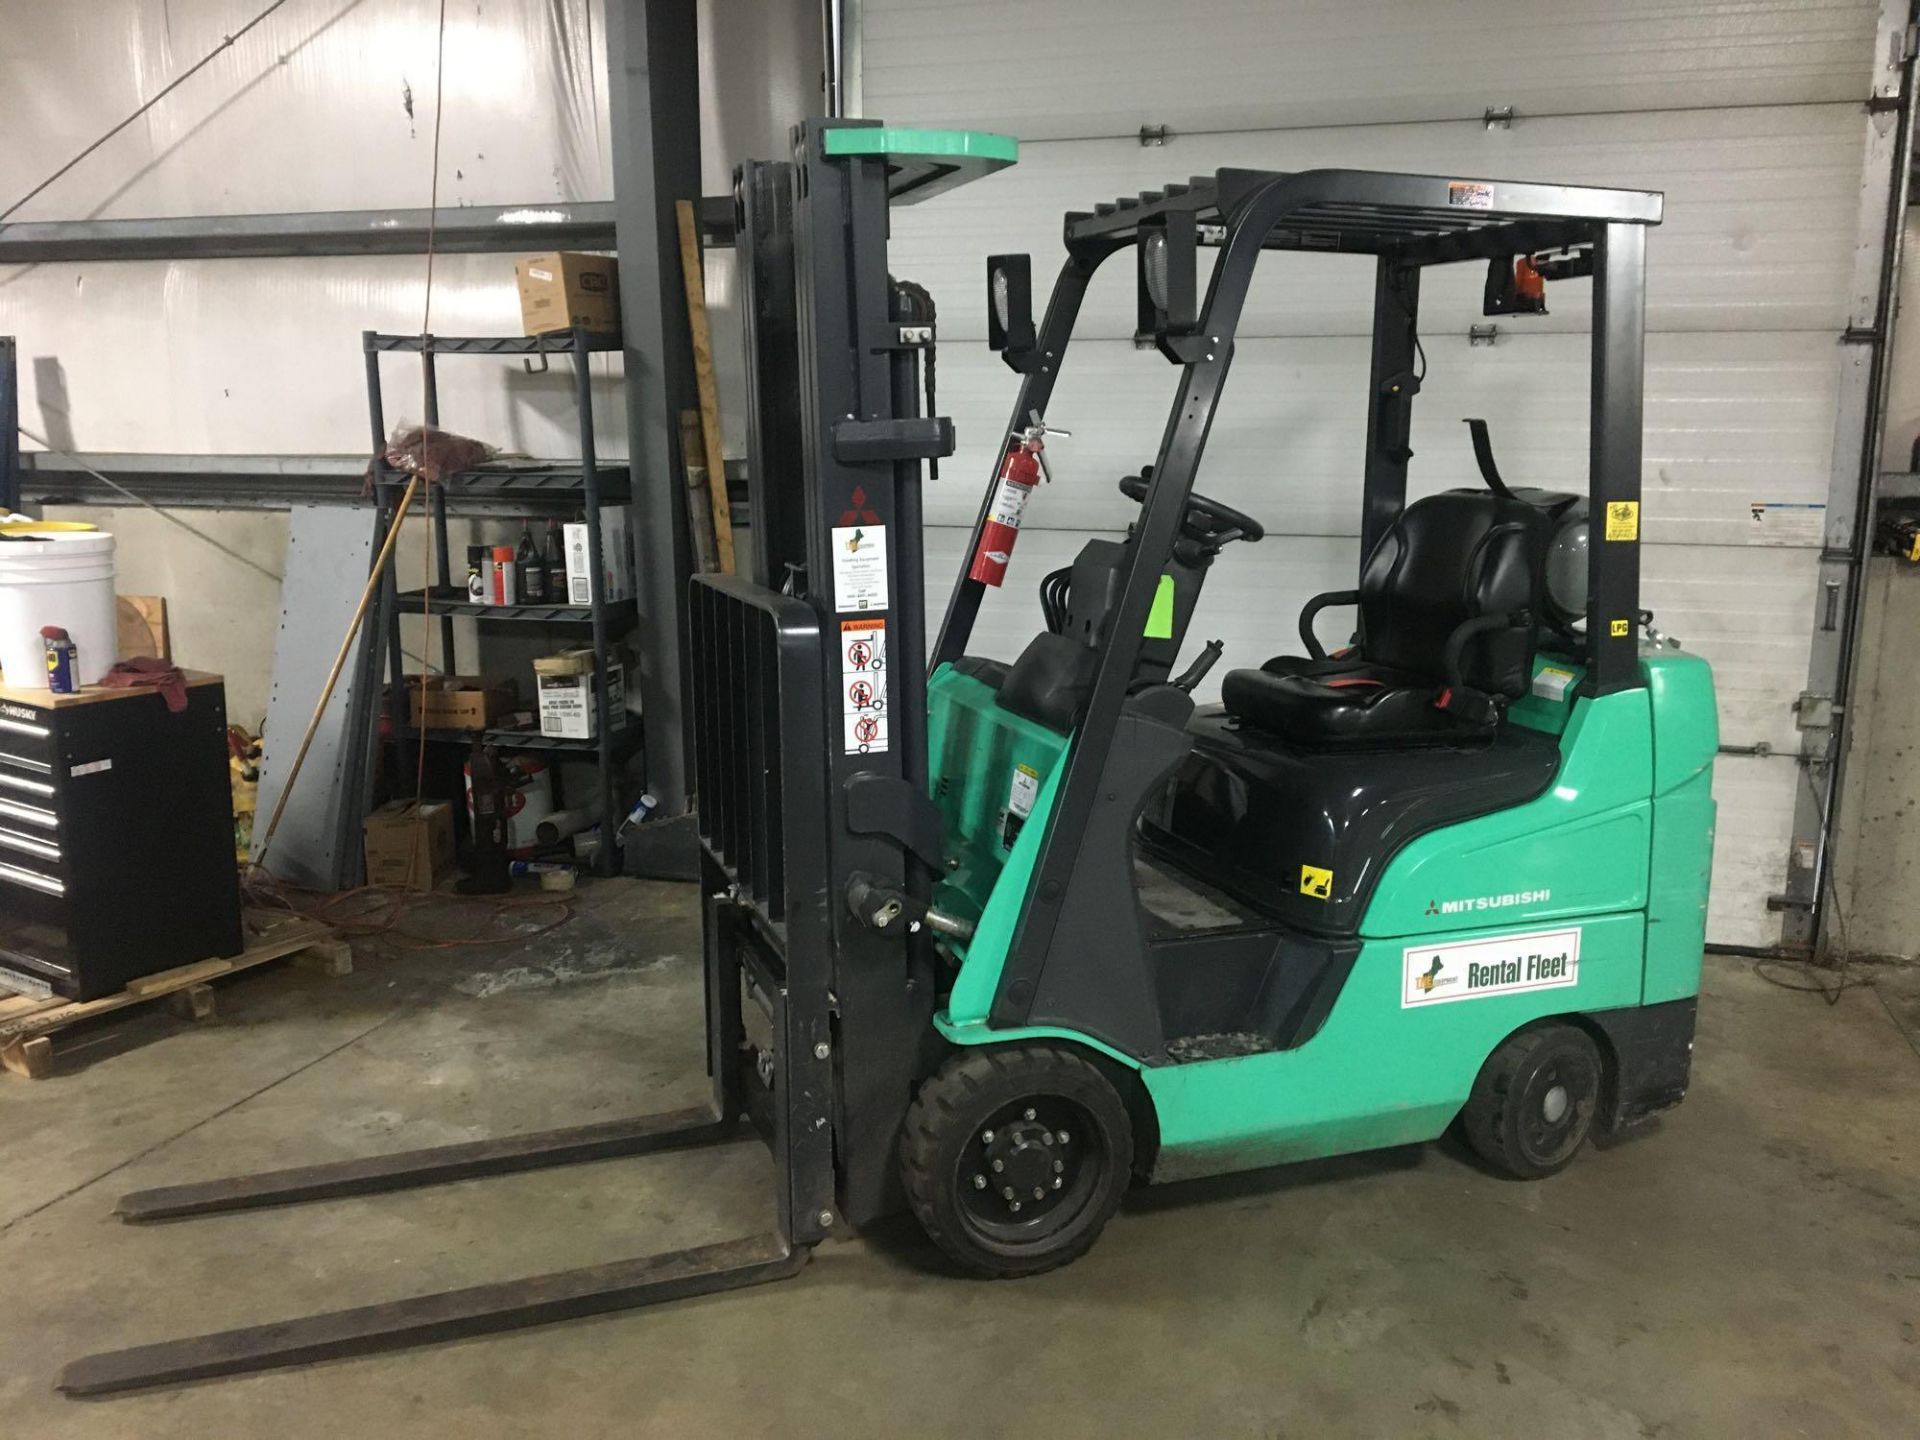 Propane Forklift, Mitsubishi, Model FGC20CN, Max Ht 187" Max Cap 3500lbs, Hrs 227 Started and Moved